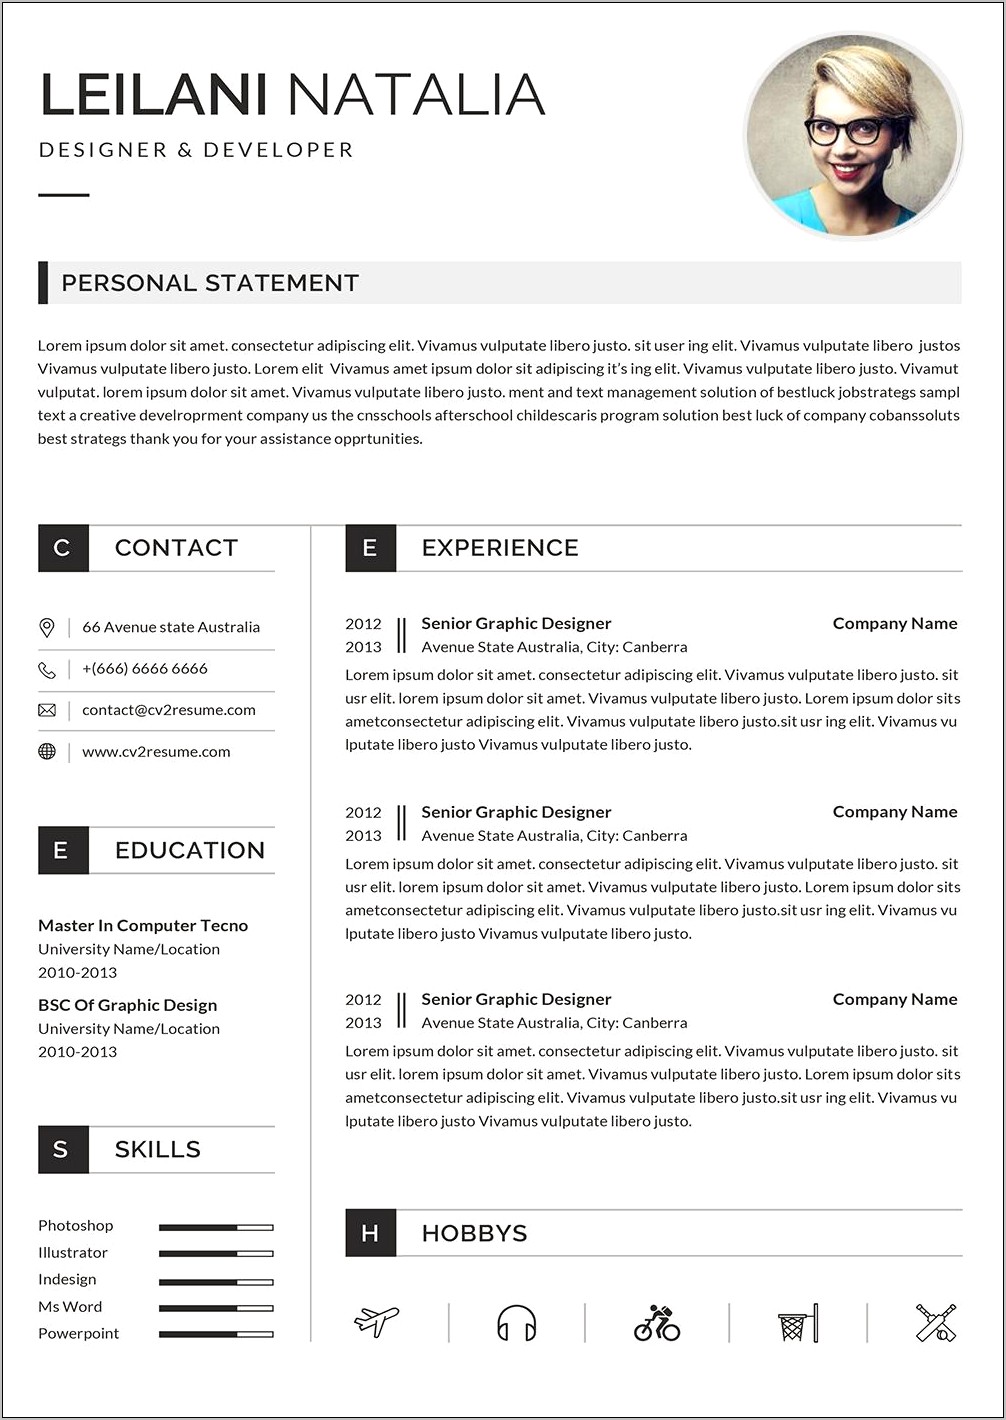 resume-template-design-free-download-word-resume-example-gallery